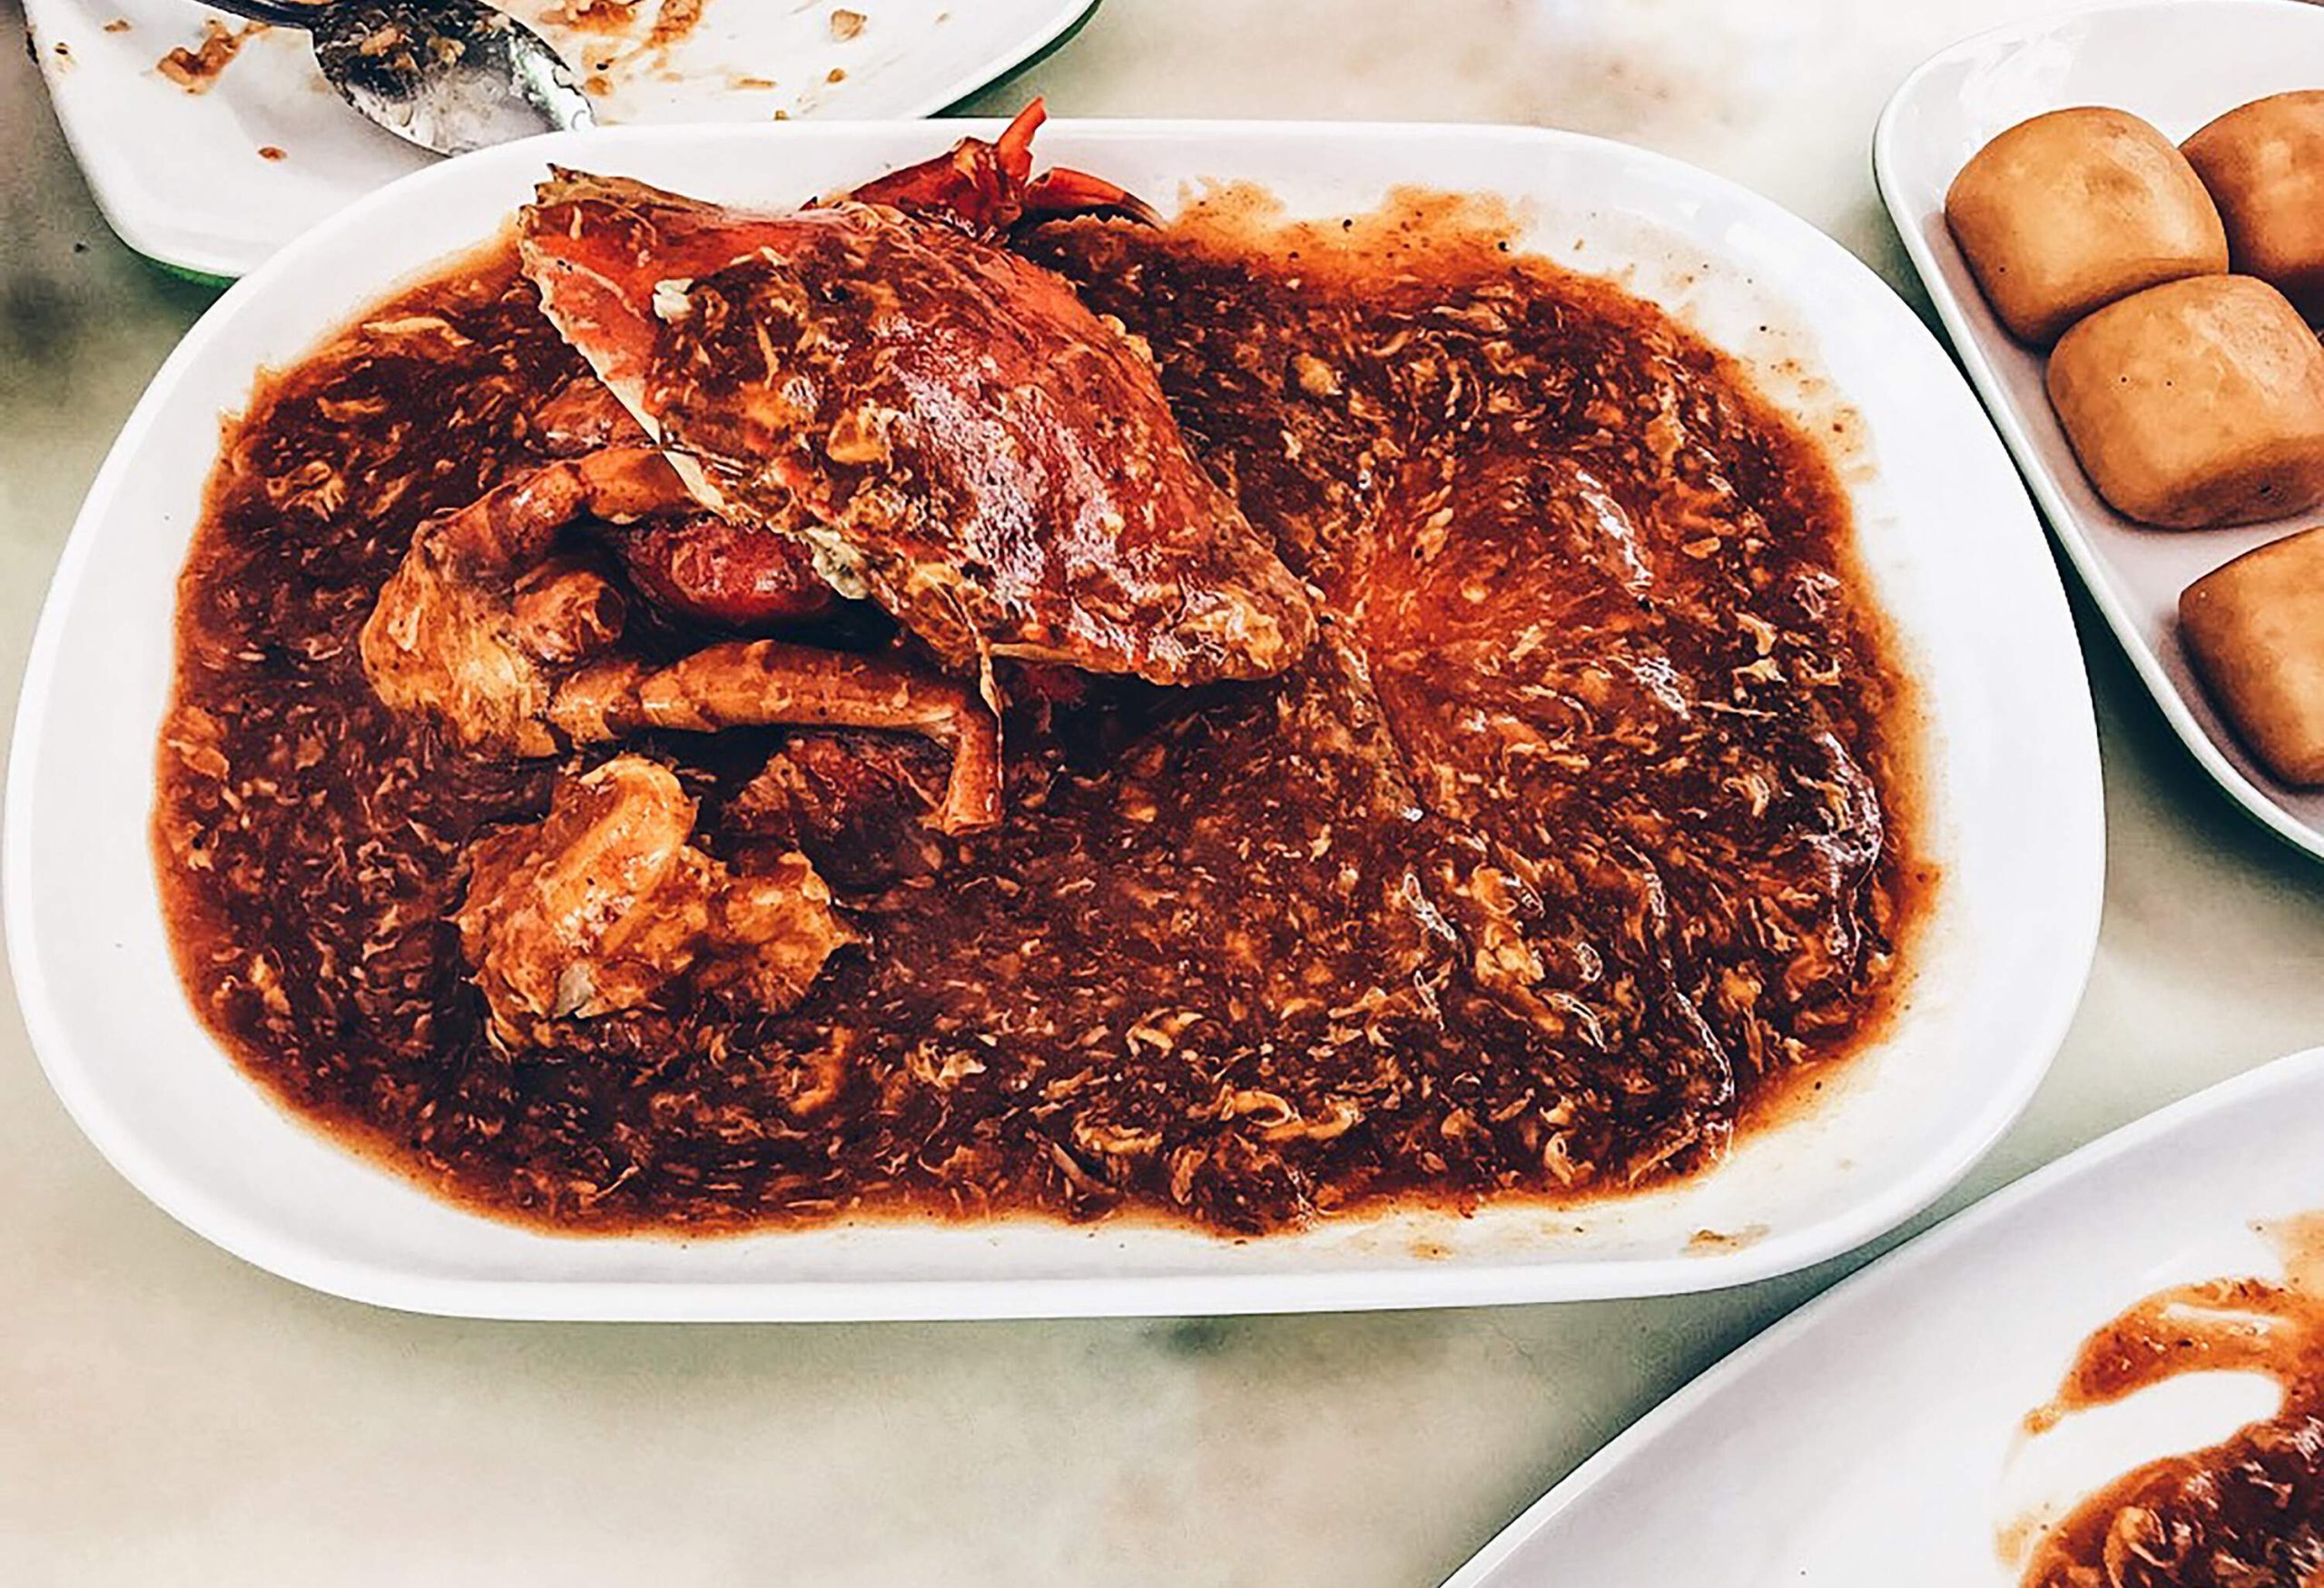 A plate of crab dish glazed with red chili sauce.